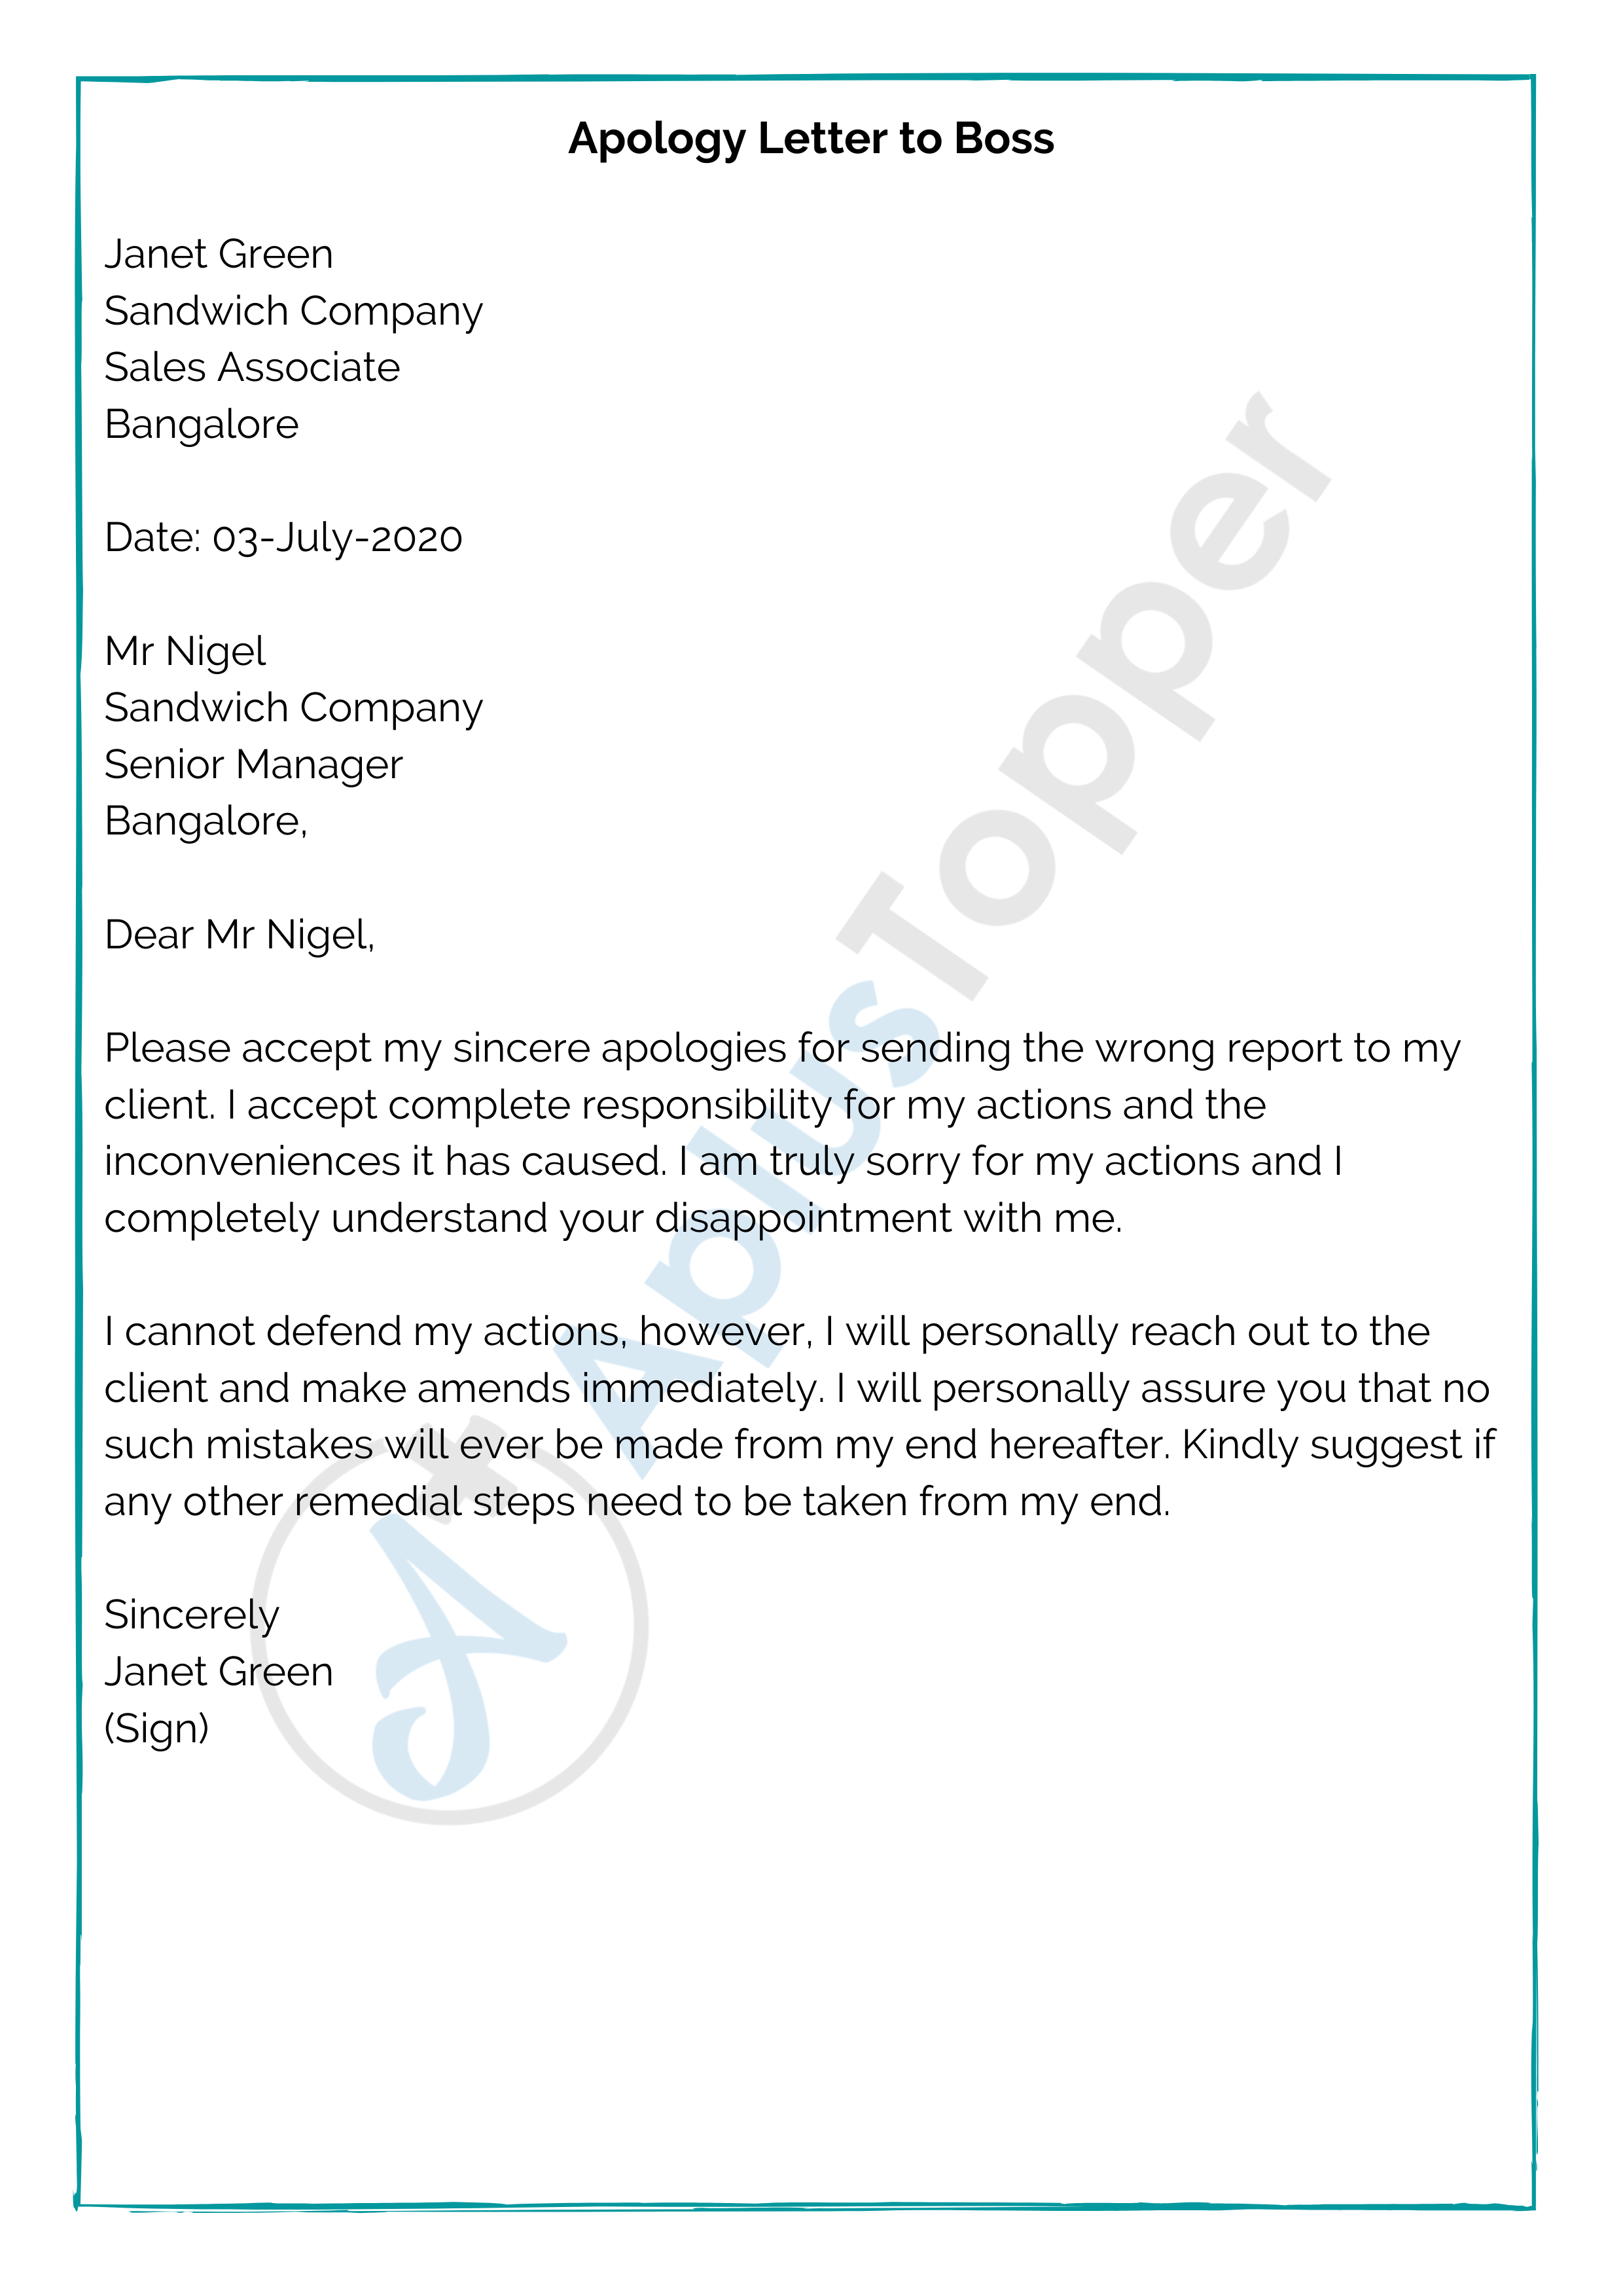 Apology Letter  Format, Samples, and How To Write an Apology